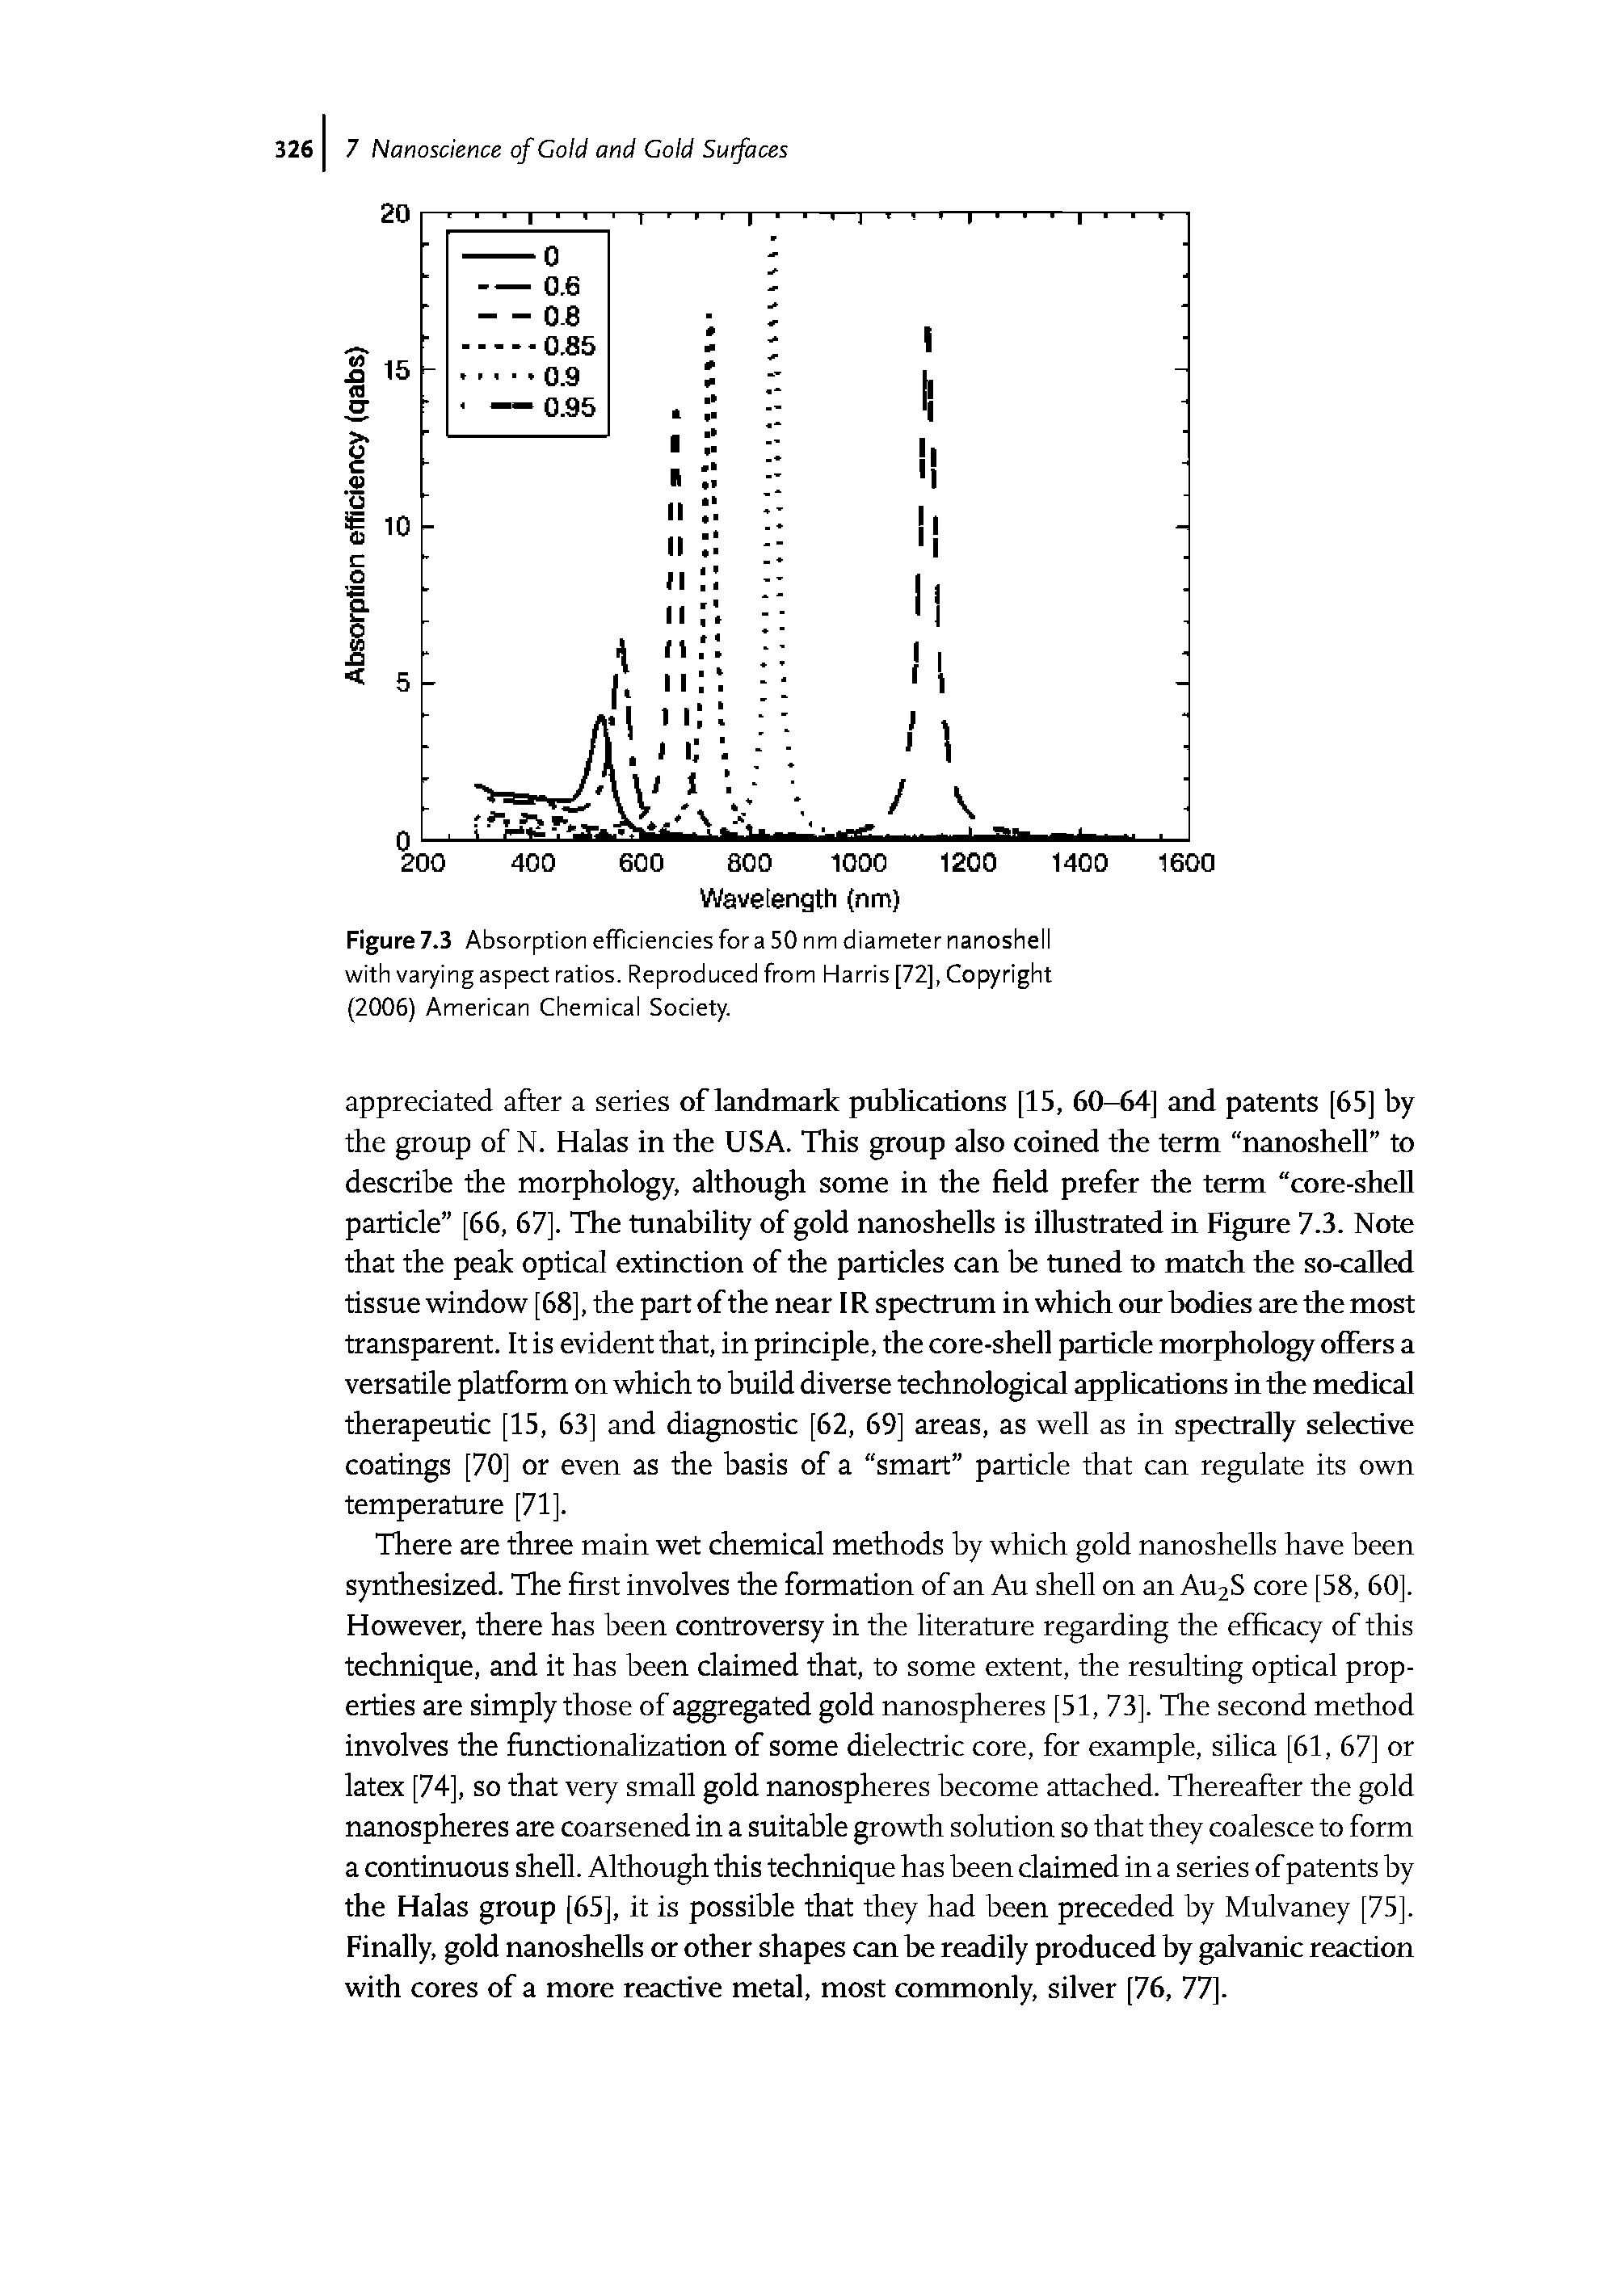 Figure 7.3 Absorption efficiencies for a 50 nm diameter nanoshell with varying aspect ratios. Reproduced from Harris [72], Copyright (2006) American Chemical Society.